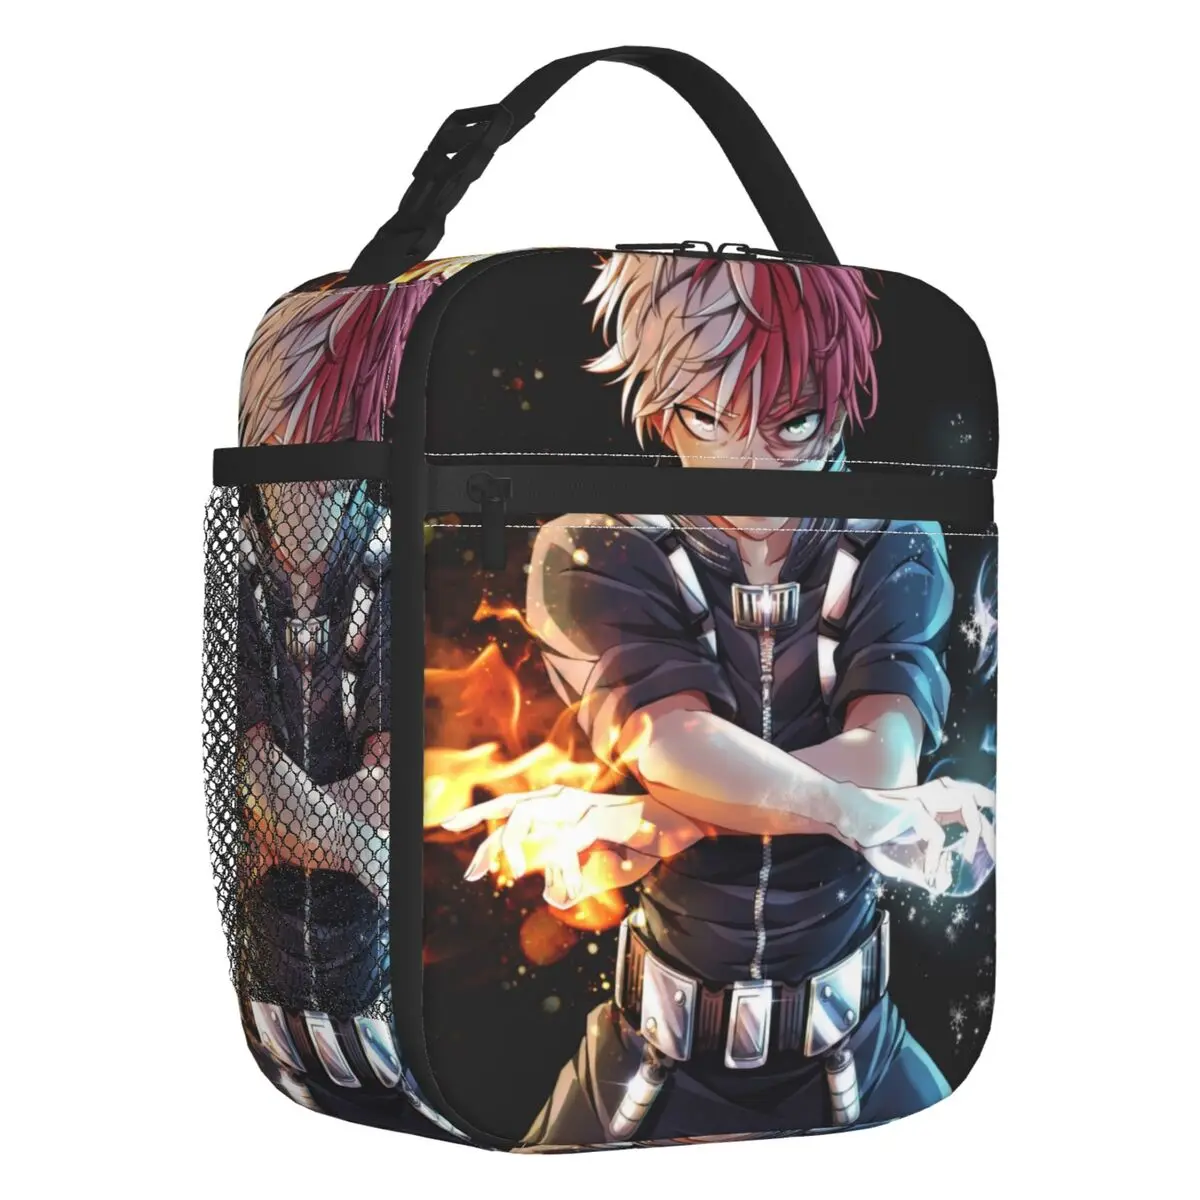 Custom Cool Todoroki BNHA Anime Lunch Bag Men Women Thermal Cooler Insulated Lunch Boxes for Children School